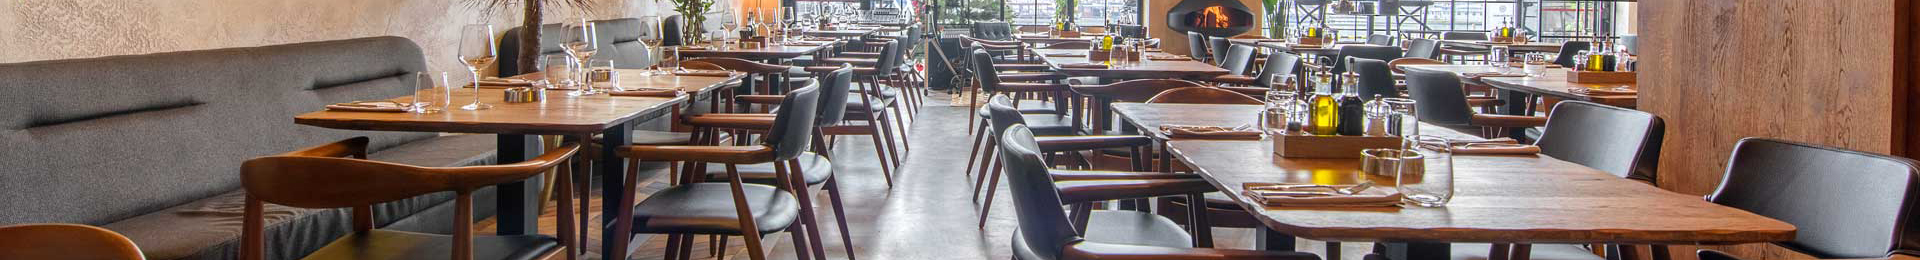 School Canteen Furniture Project in Singapore